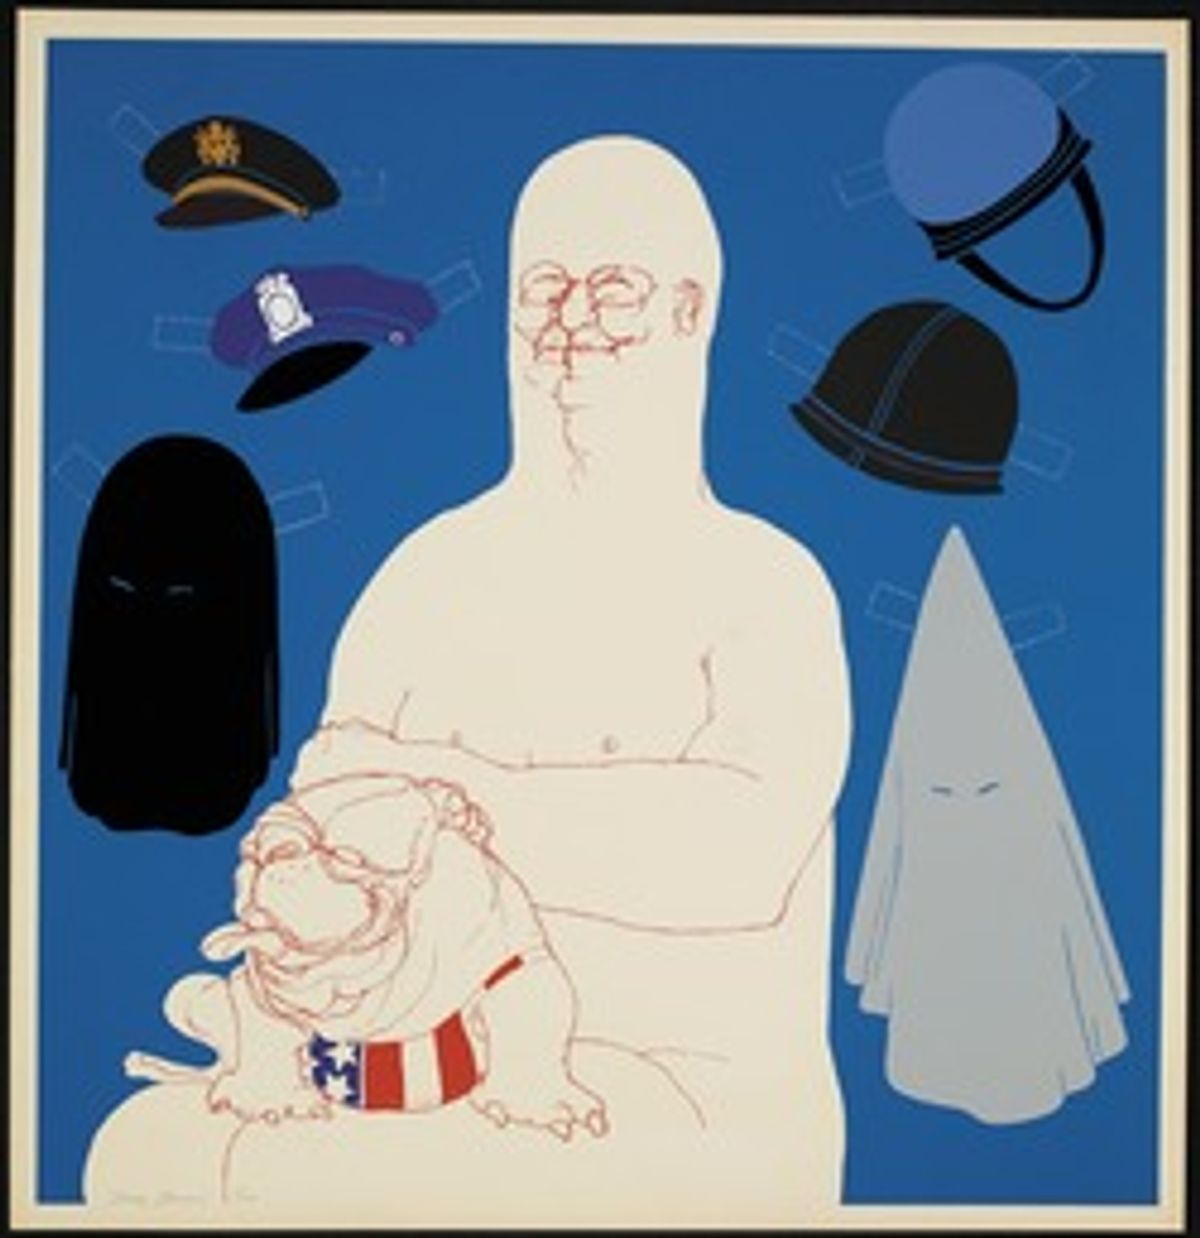 May Stevens’s screenprint Big Daddy with Hats (1971) (© May Stevens, Courtesy the artist and Mary Ryan Gallery, New York)